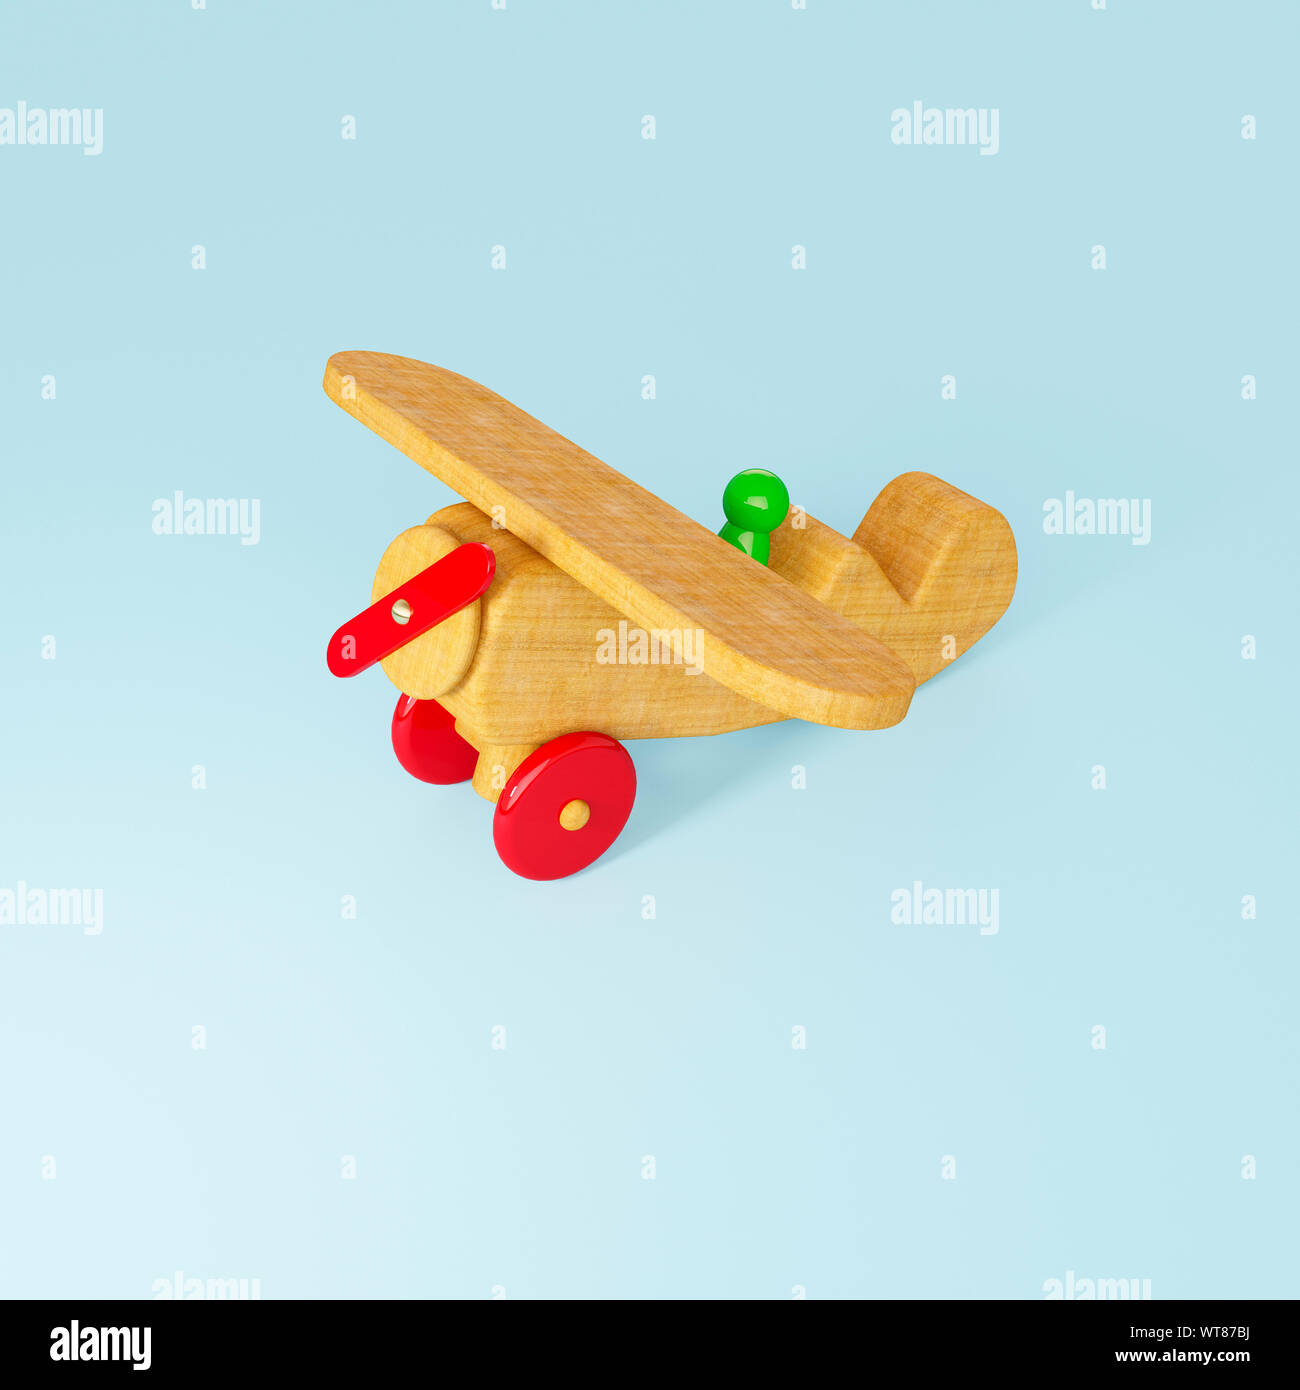 Childrens wooden toys, a wooden aeroplane and pilot toy Stock Photo